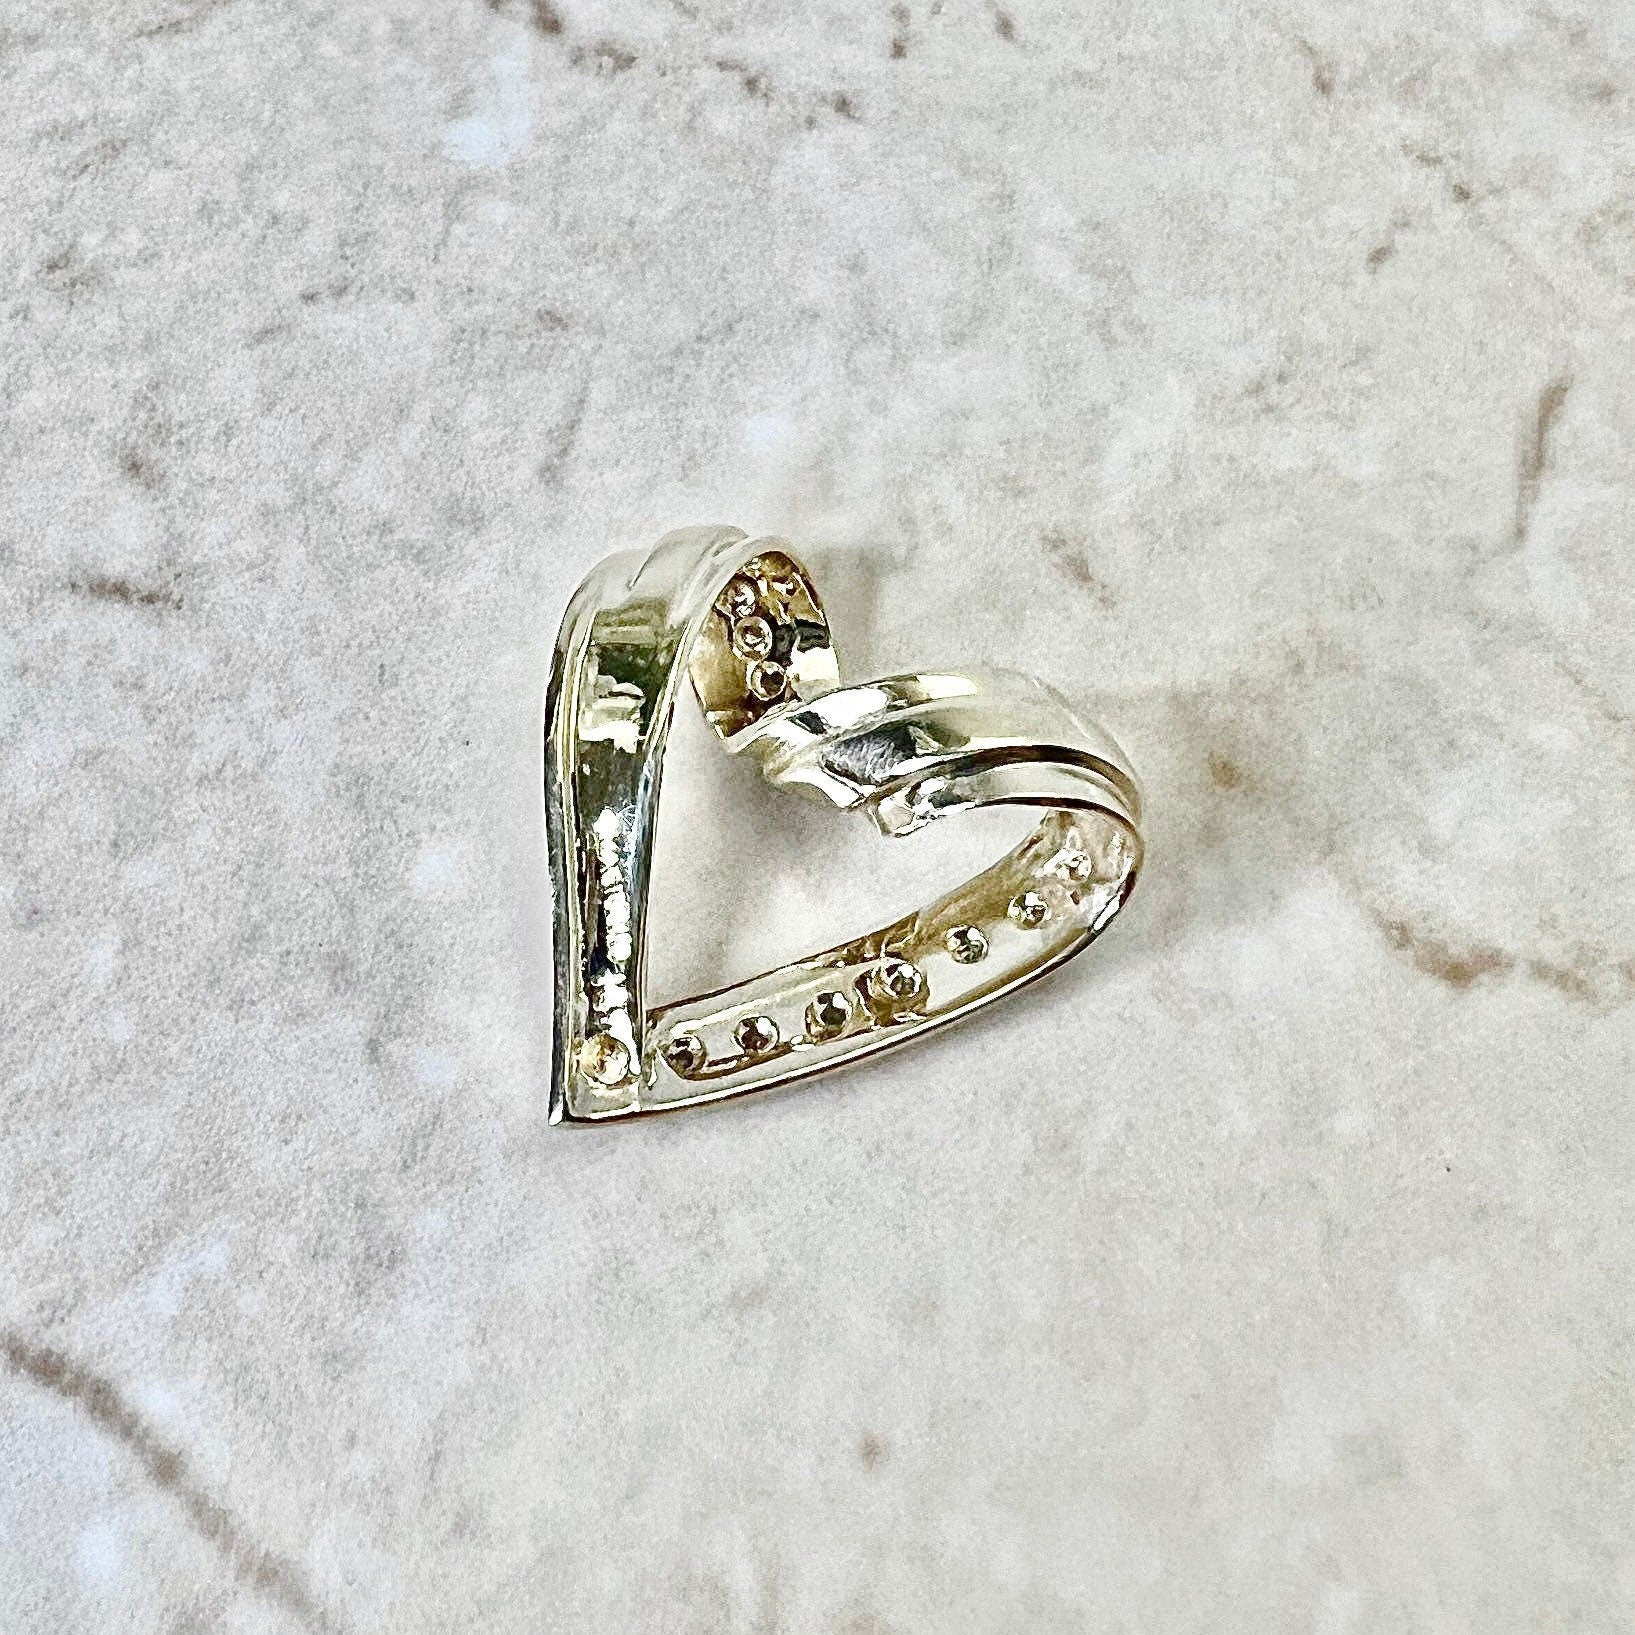 14K Diamond Heart Pendant Necklace - Yellow Gold Diamond Pendant Necklace - Birthday Gift - Valentine’s Day Gift For Her - Best Gift For Her